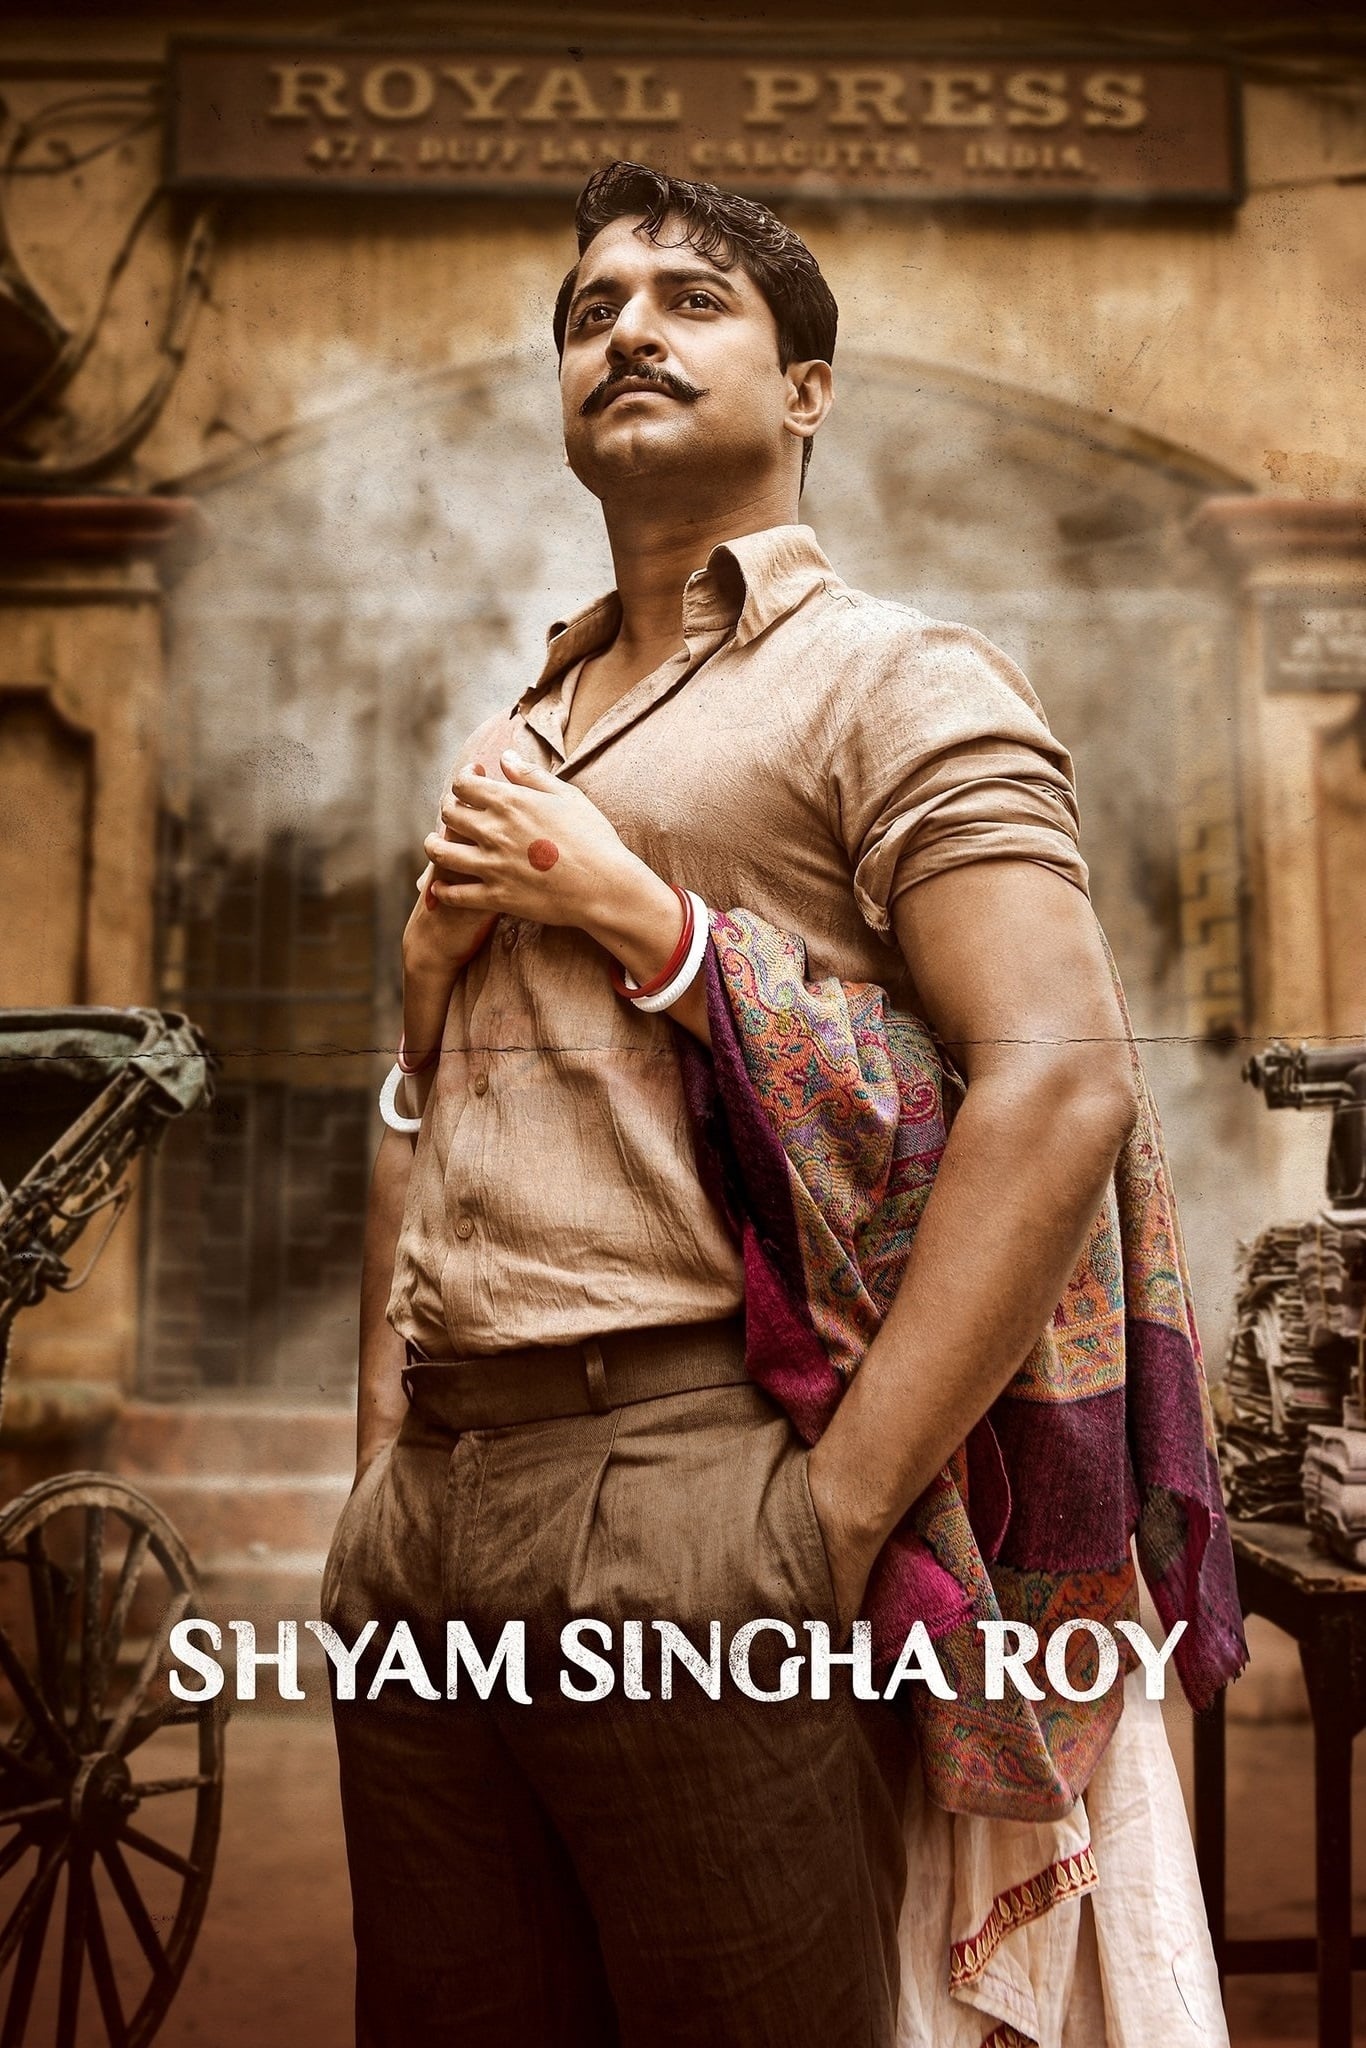 Poster for the movie "Shyam Singha Roy"